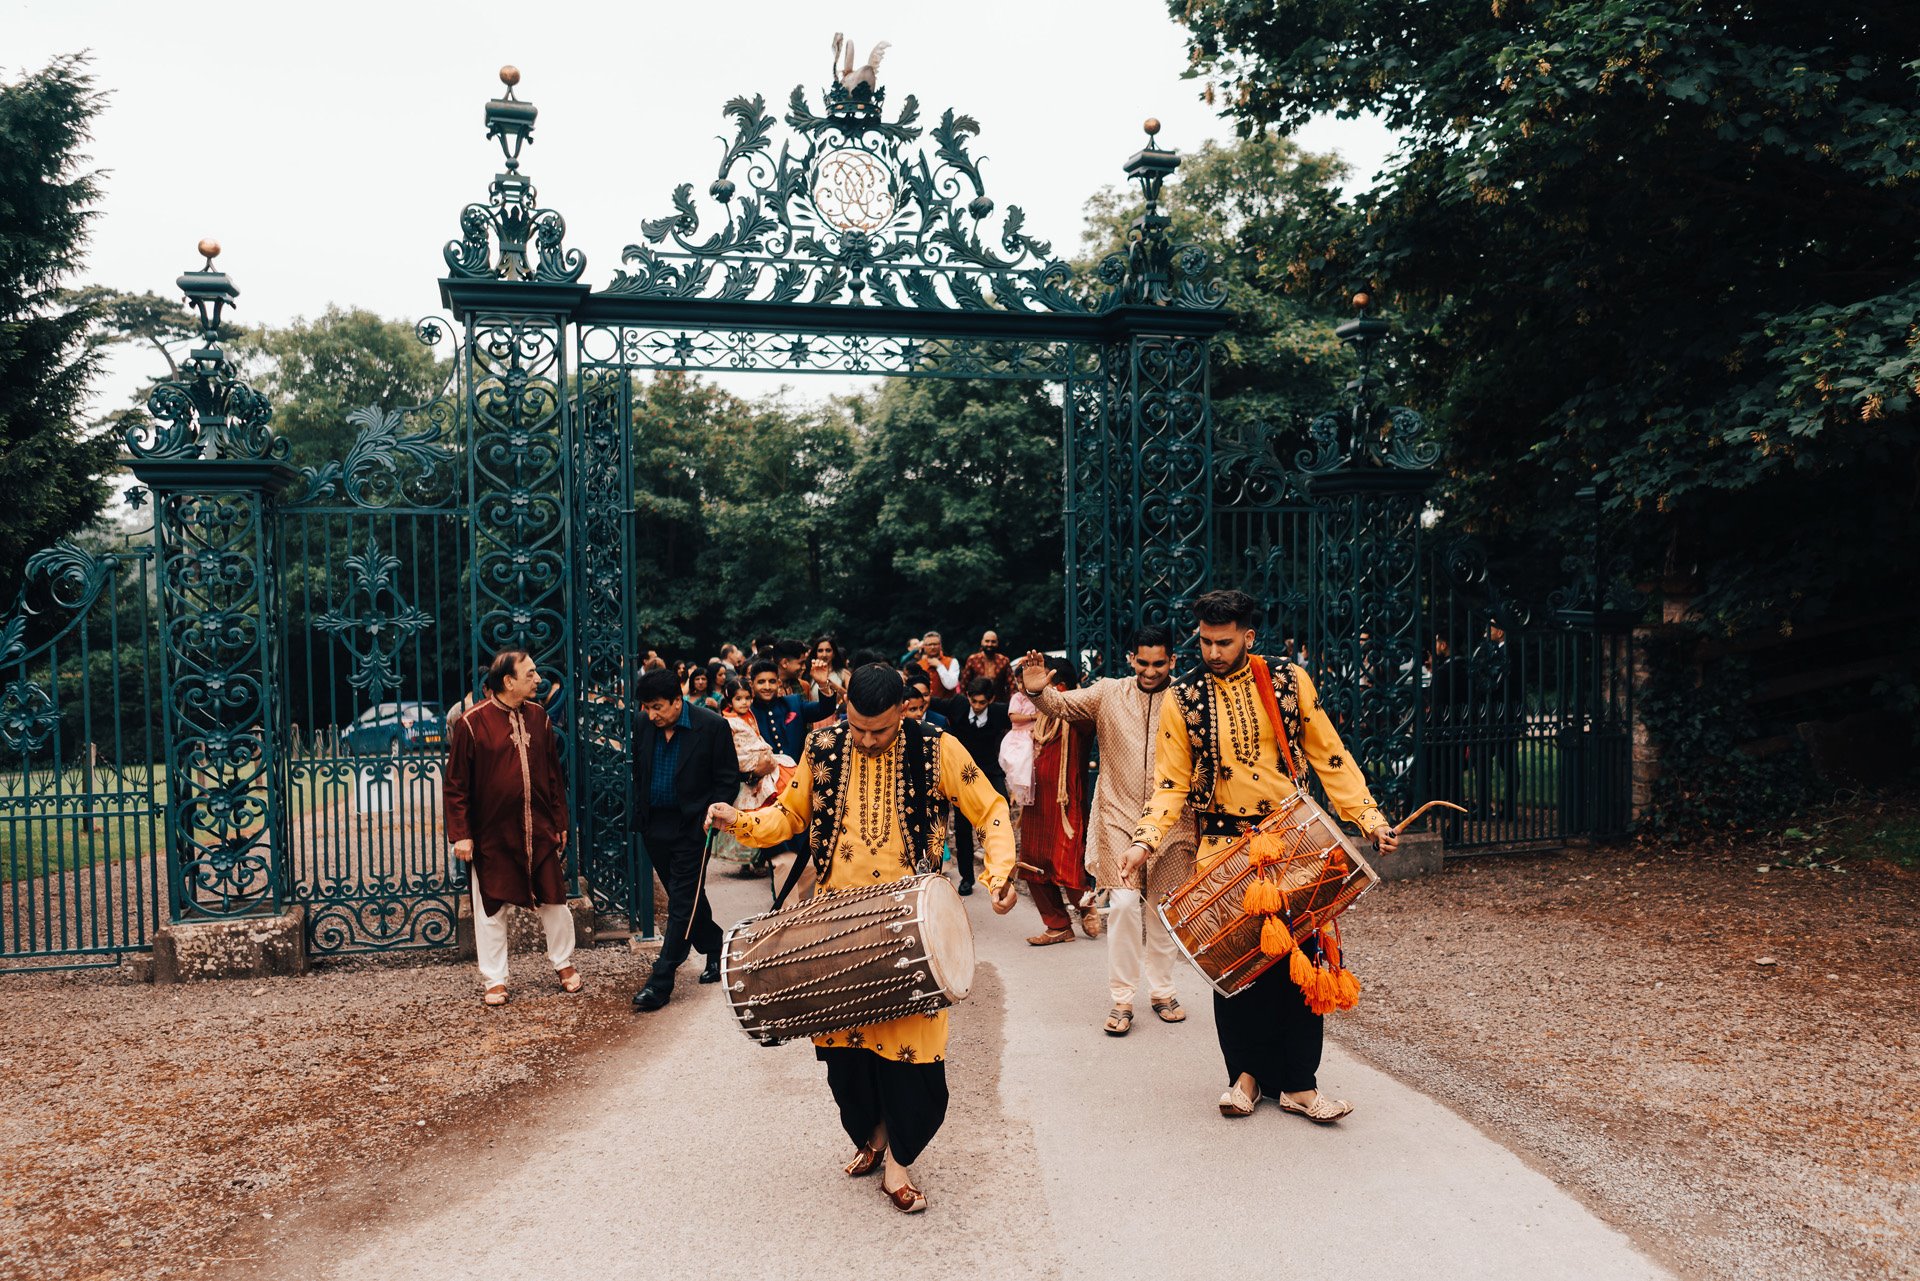 Baraat procession past the wrought iron gates of indian wedding venue elmore court